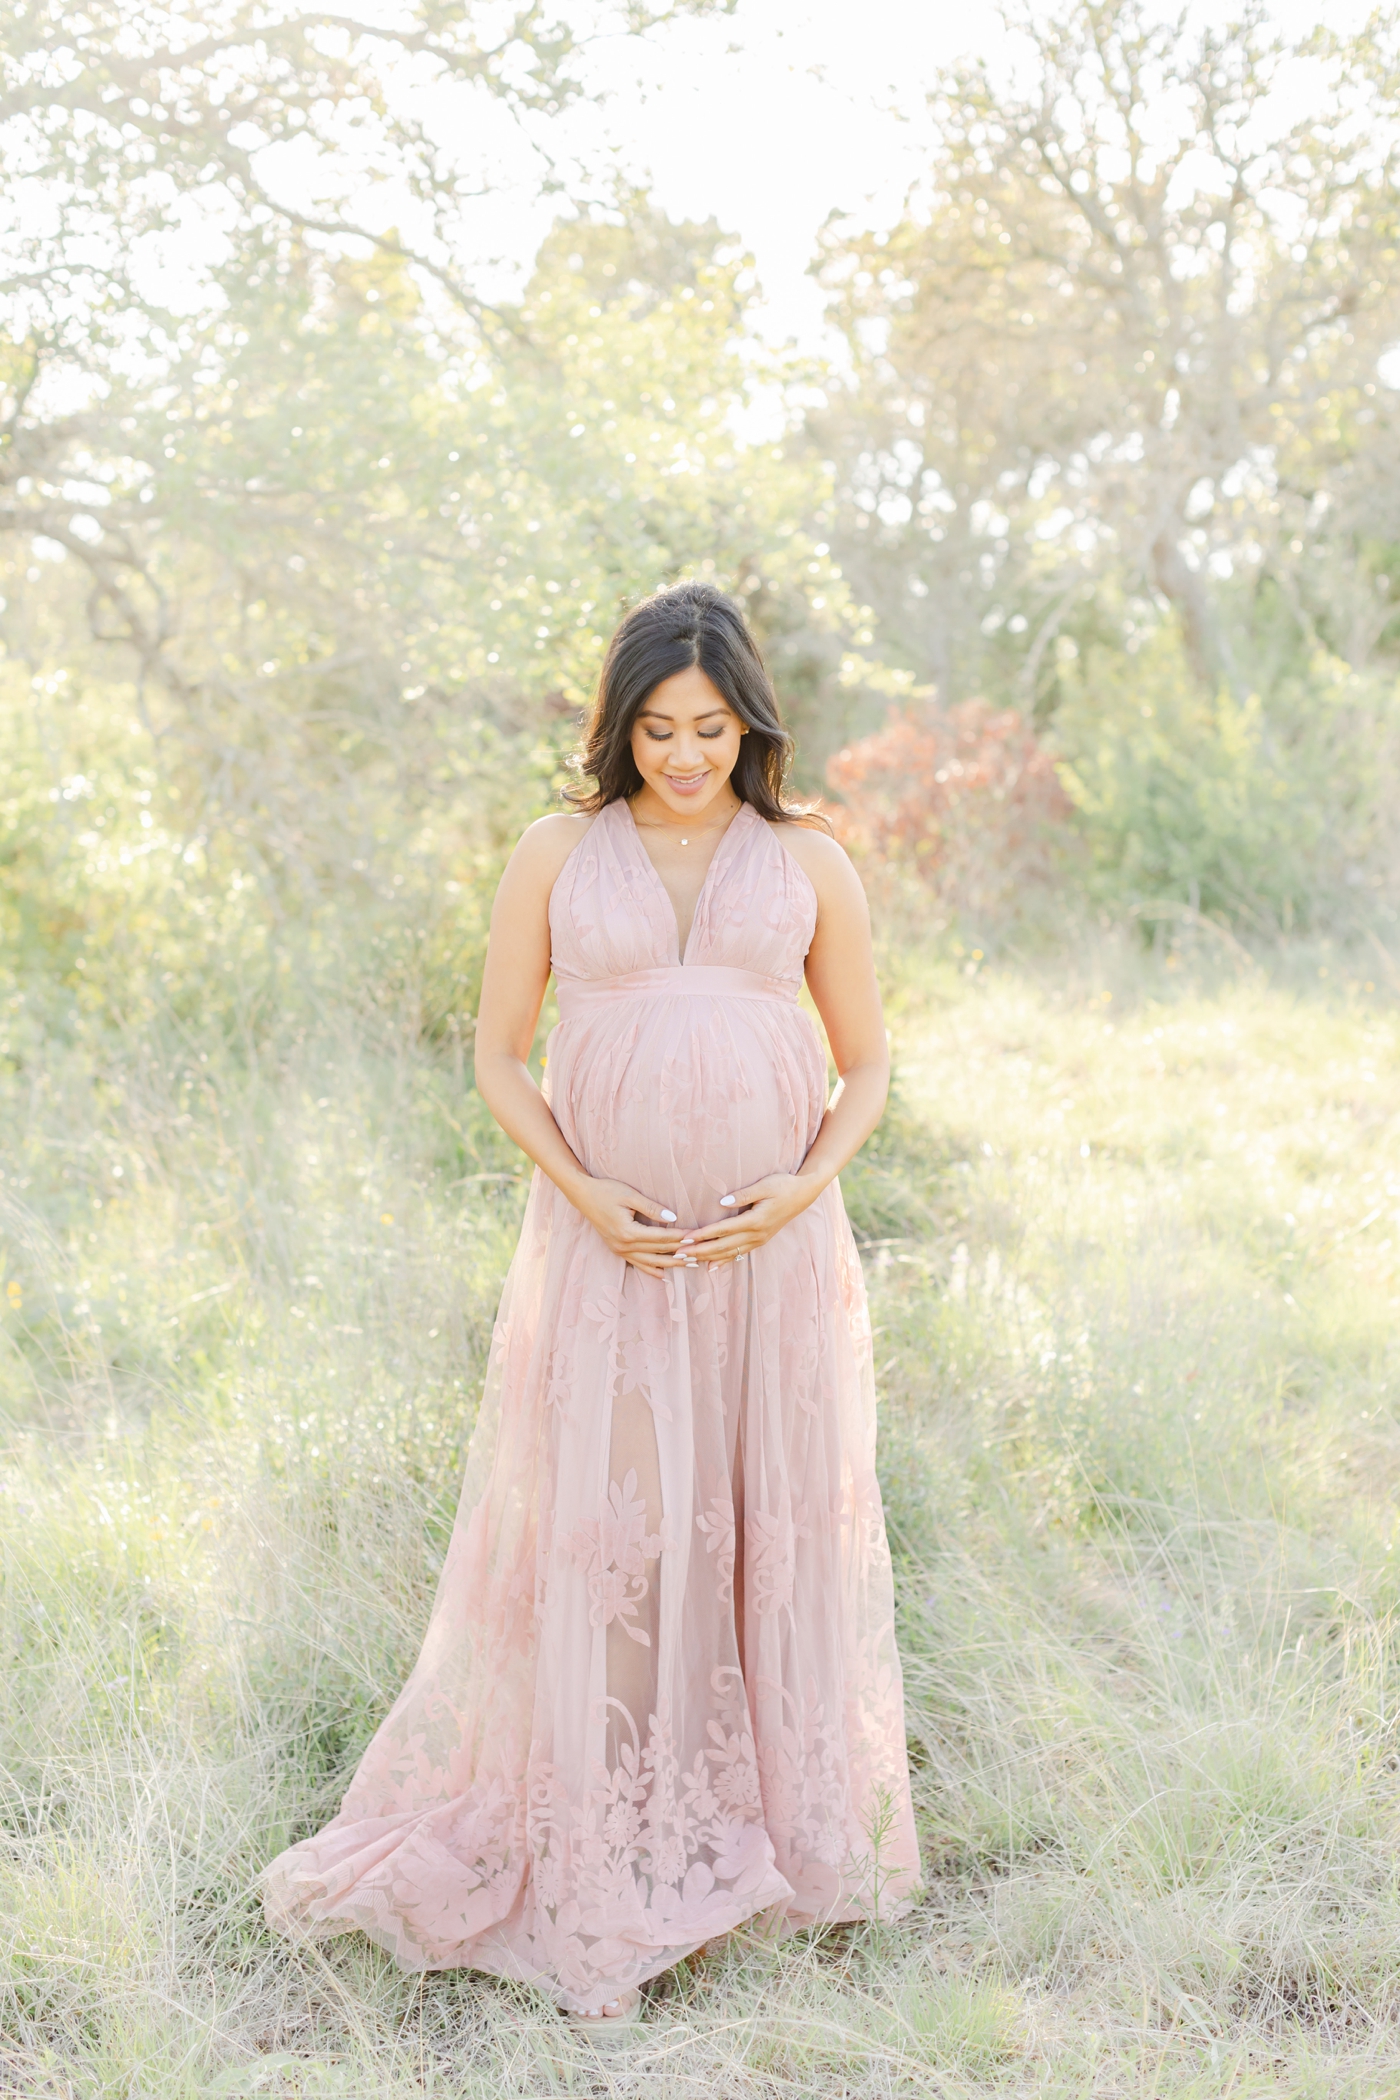 Pregnant Mom in pink lace maxi dress looking at bump during field maternity session with Sana Ahmed Photography.